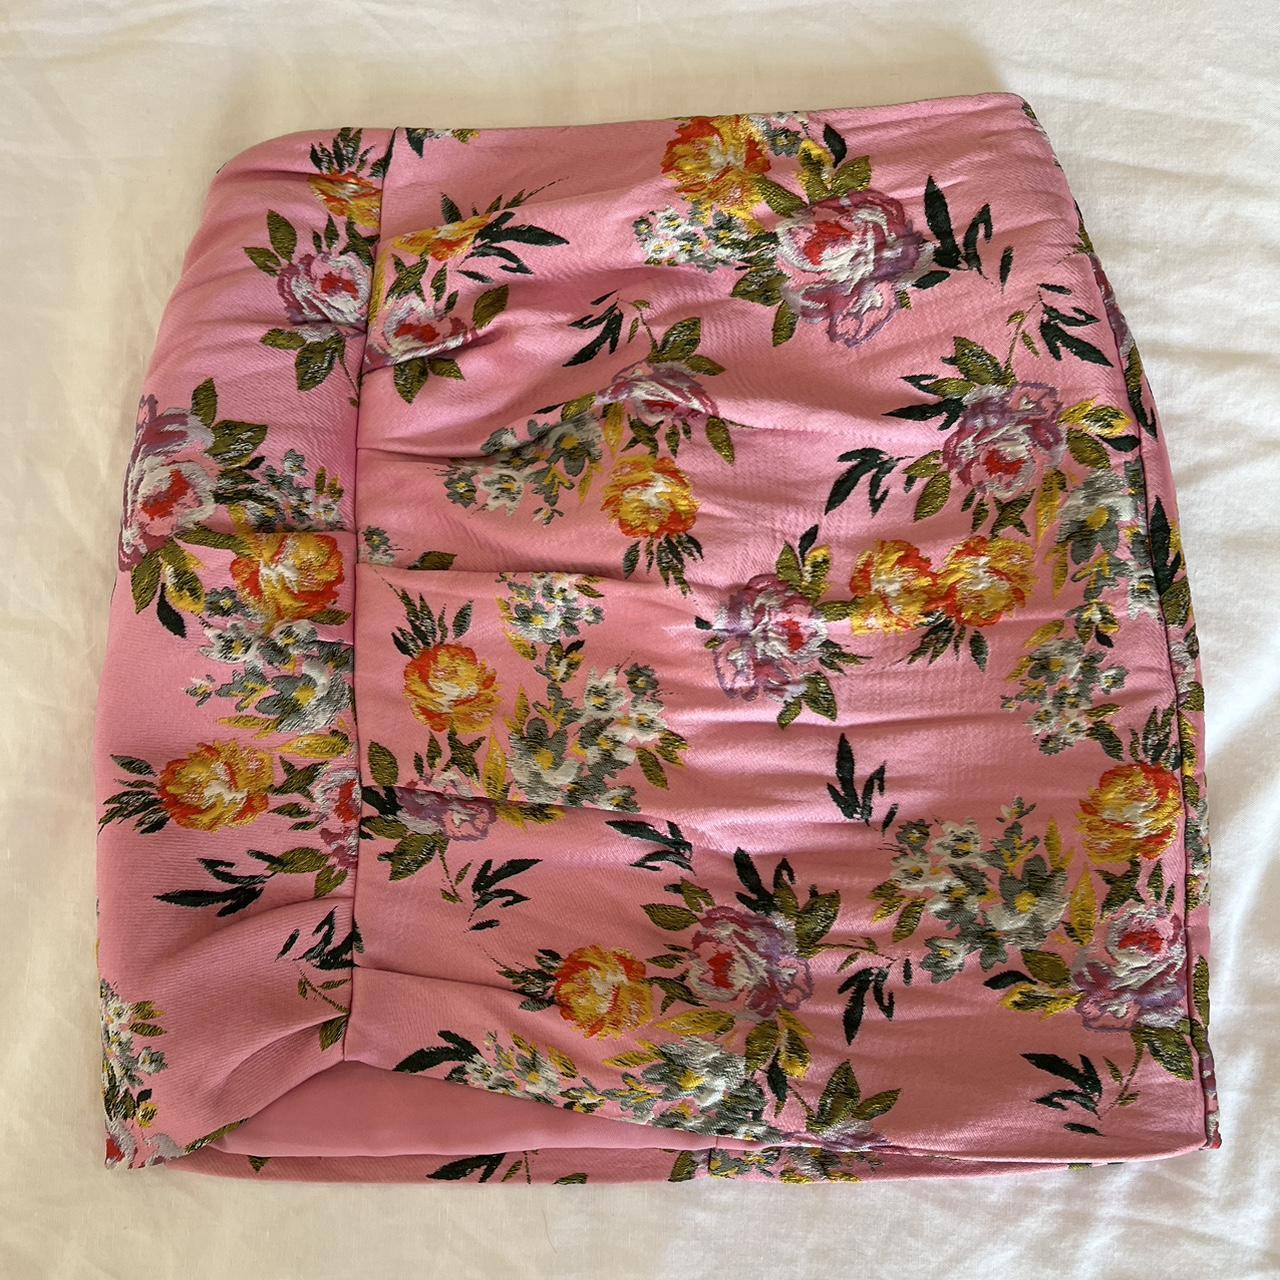 Bec and Bridge pink floral mini skirt. Absolutely... - Depop